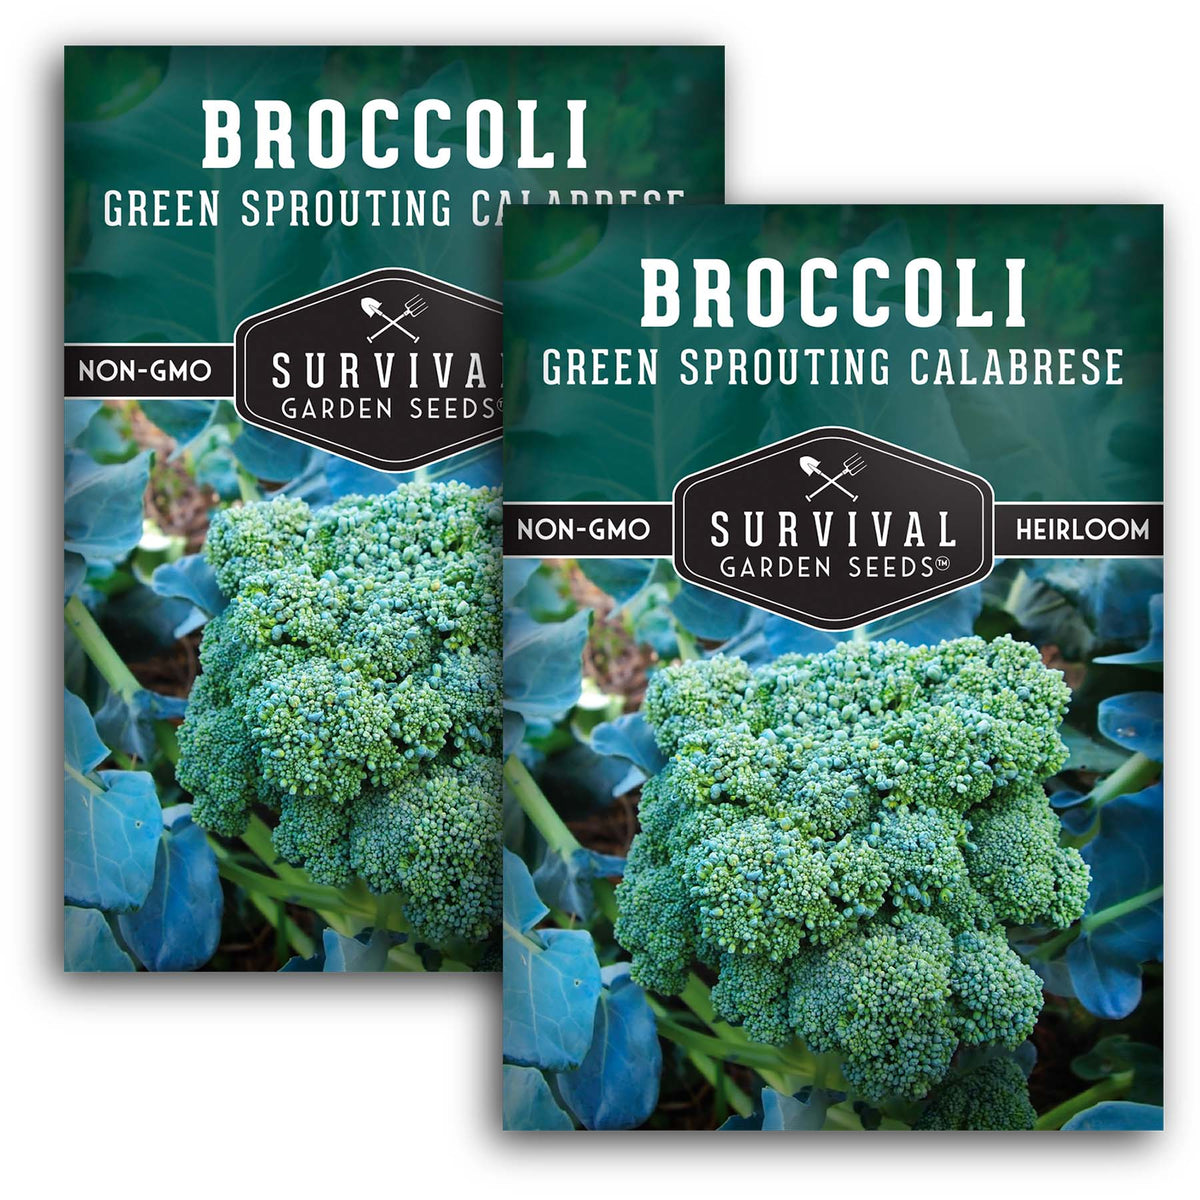 Green Sprouting Calabrese Broccoli Seeds